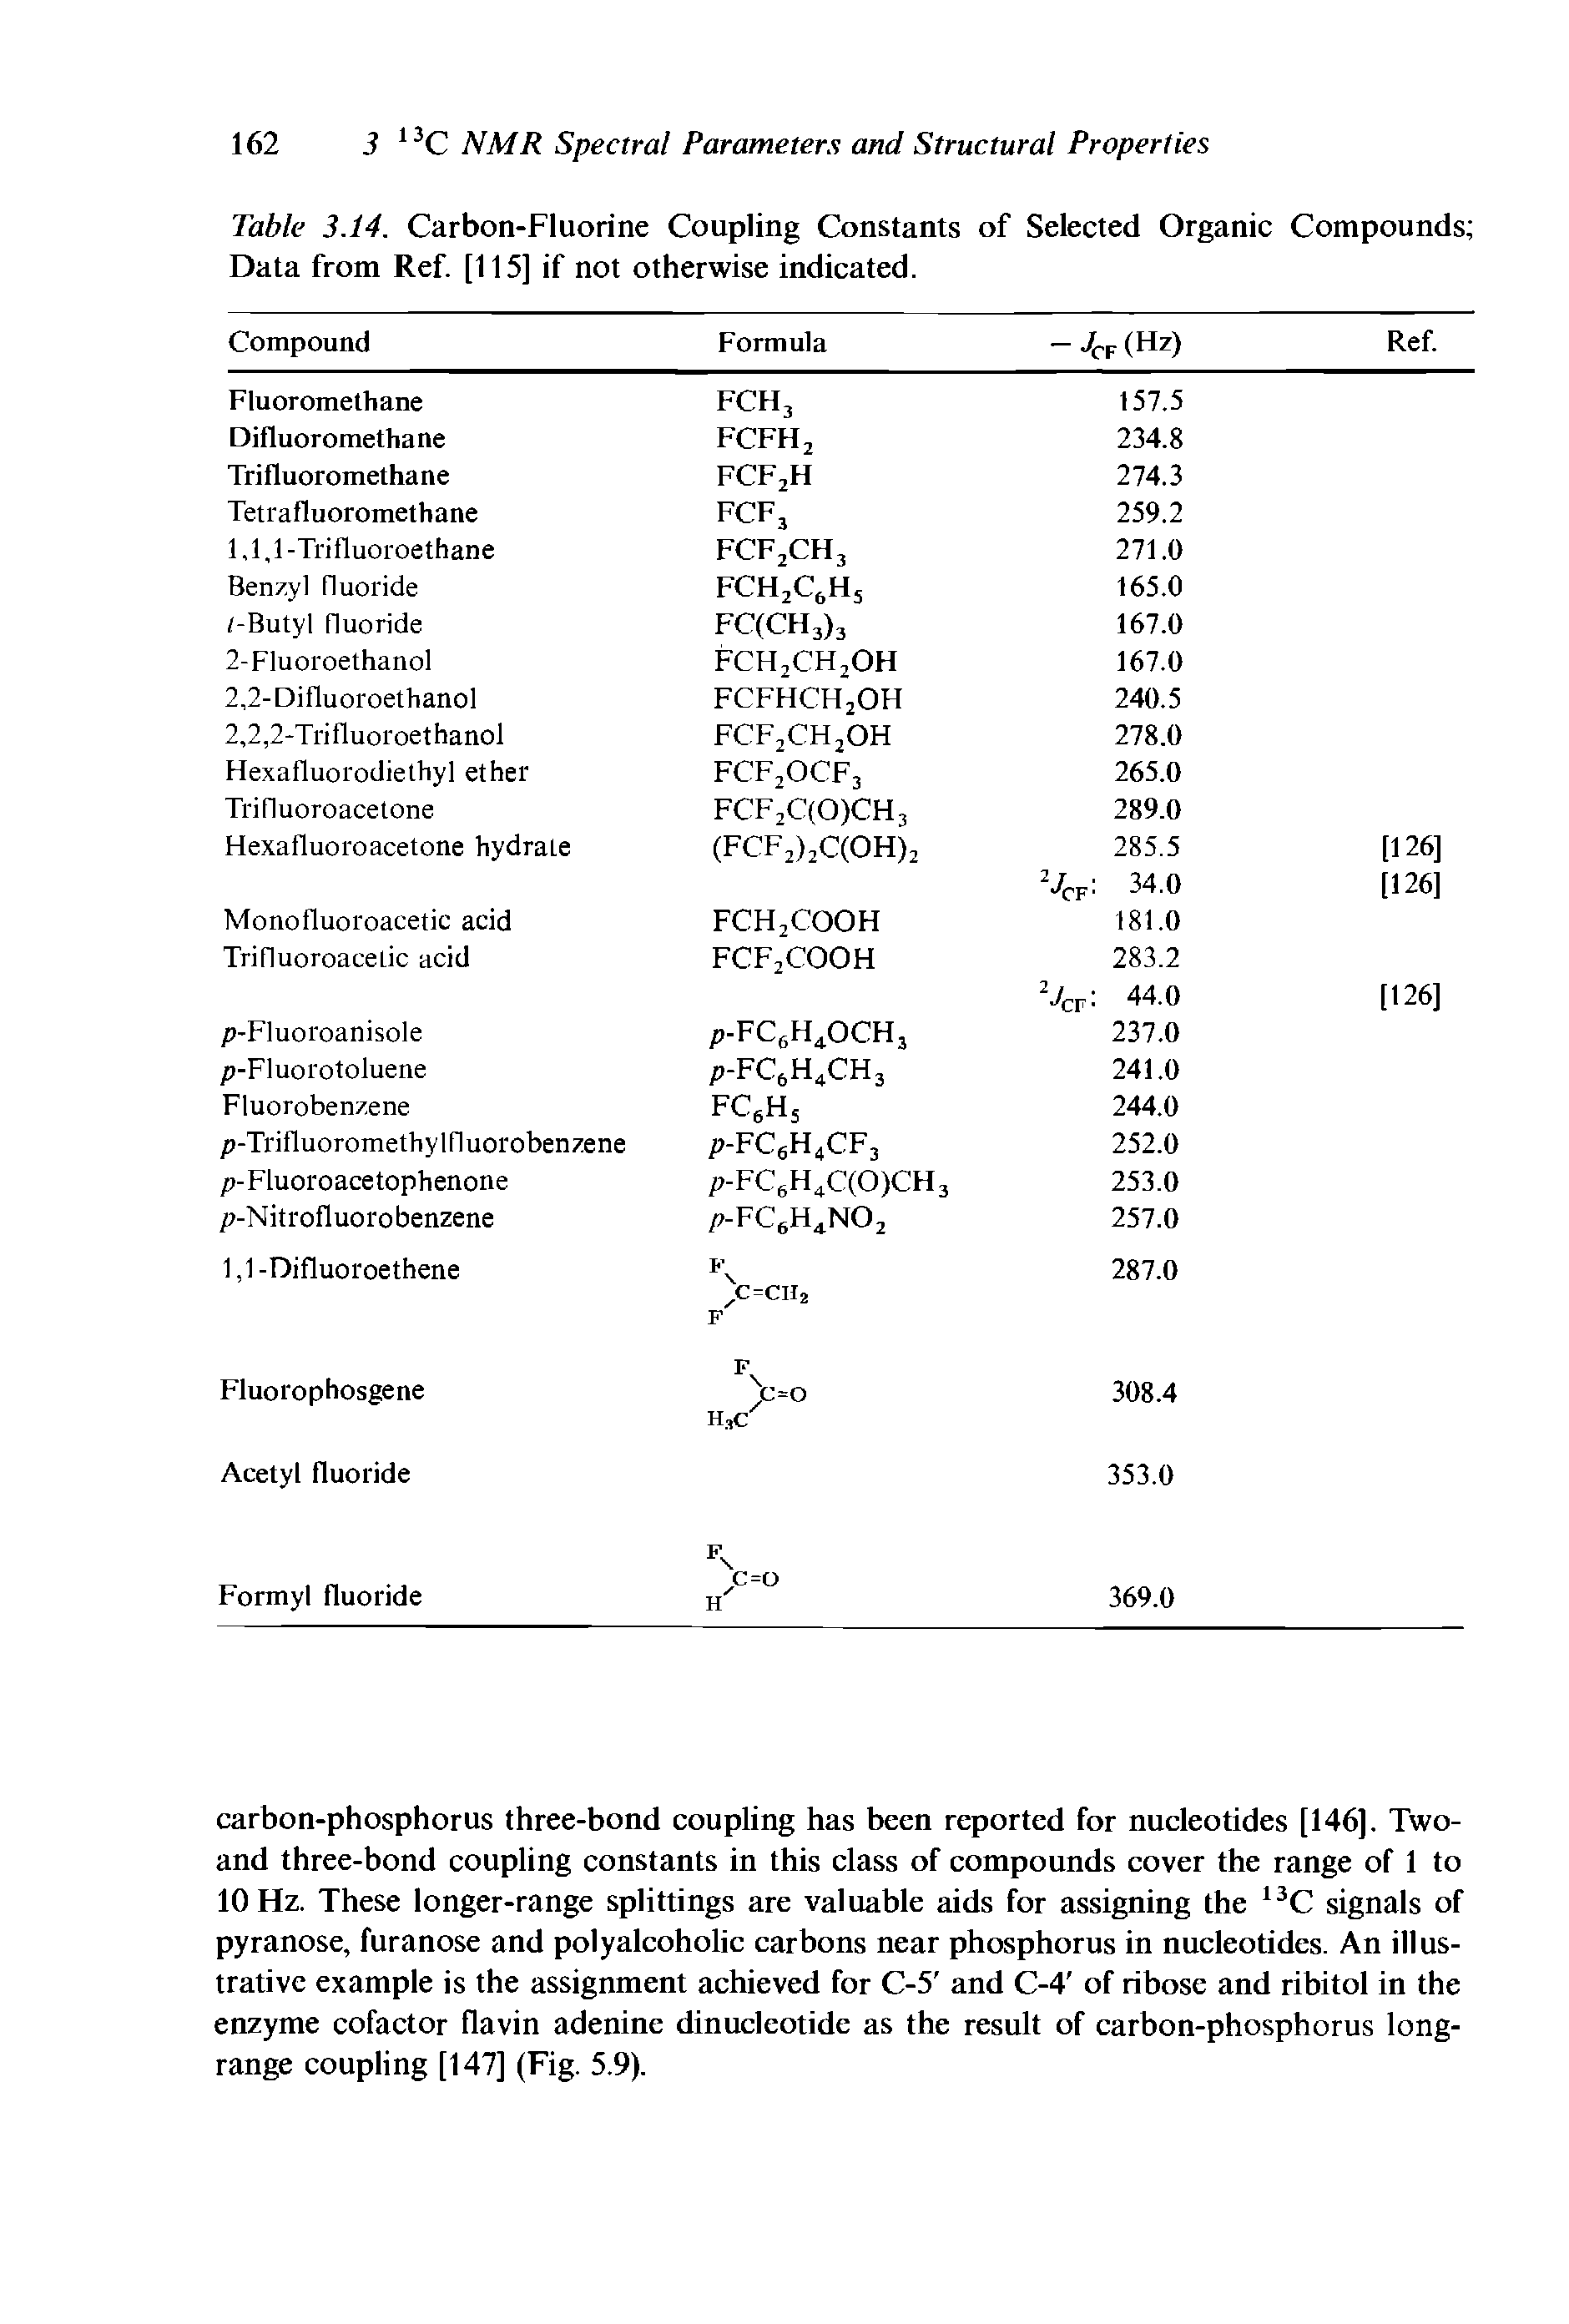 Table 3.14. Carbon-Fluorine Coupling Constants of Selected Organic Compounds Data from Ref. [115] if not otherwise indicated.